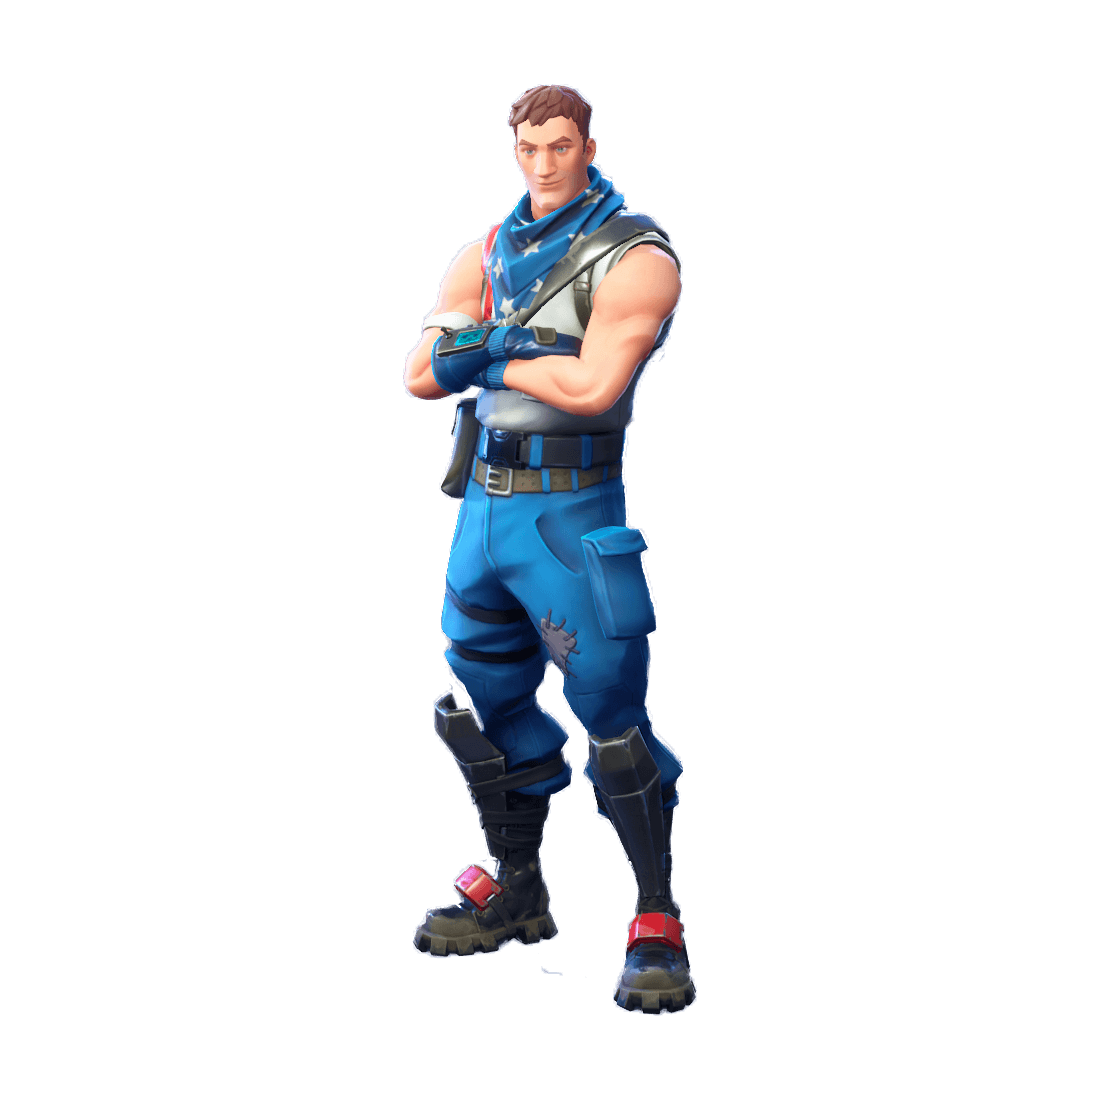 Uncommon Star Spangled Trooper Outfit Fortnite Cosmetic Cost 800 V